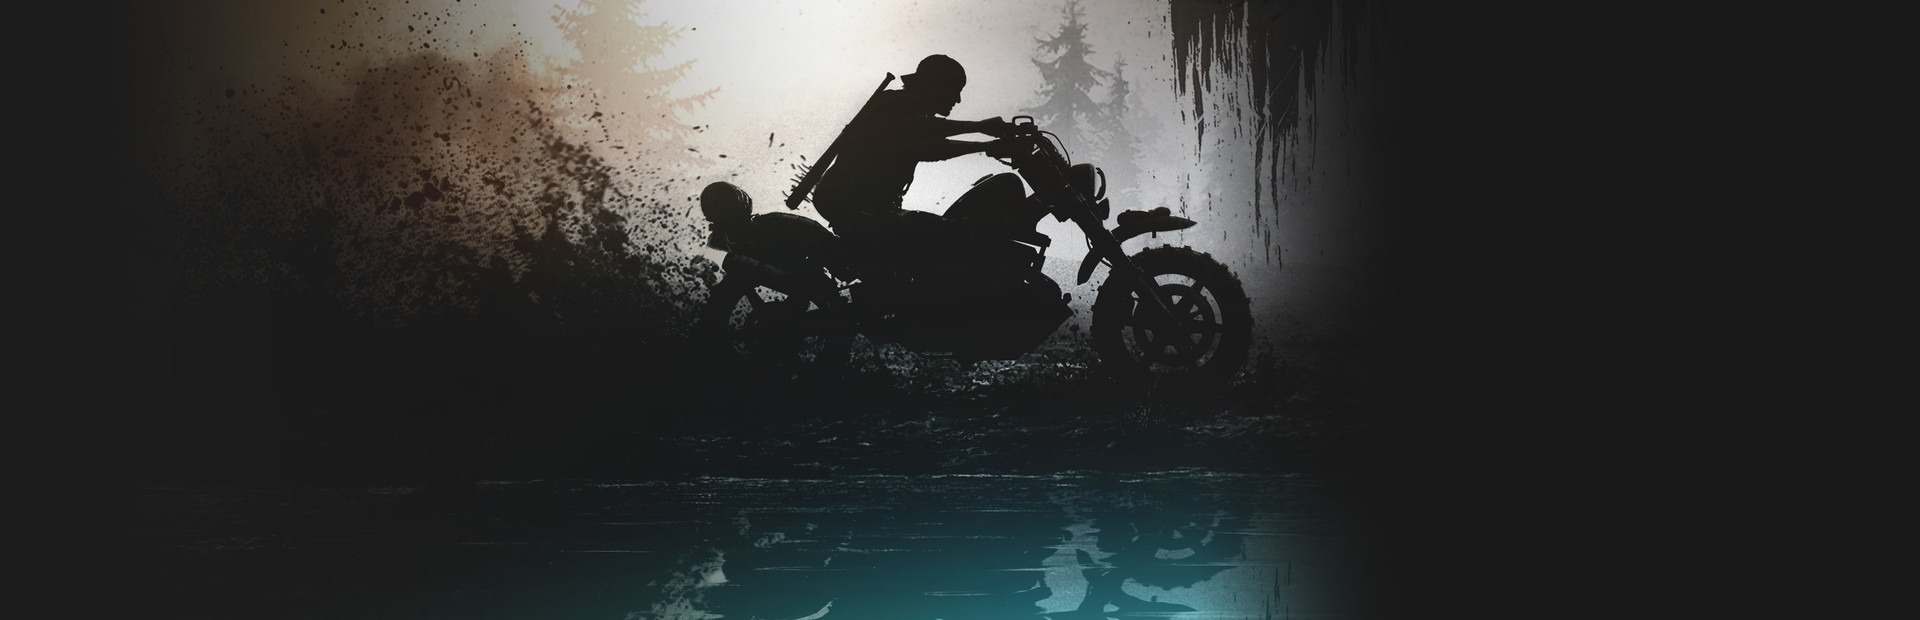 Days Gone for PC quick review: Definitely more immersive - The Modern  Creatures